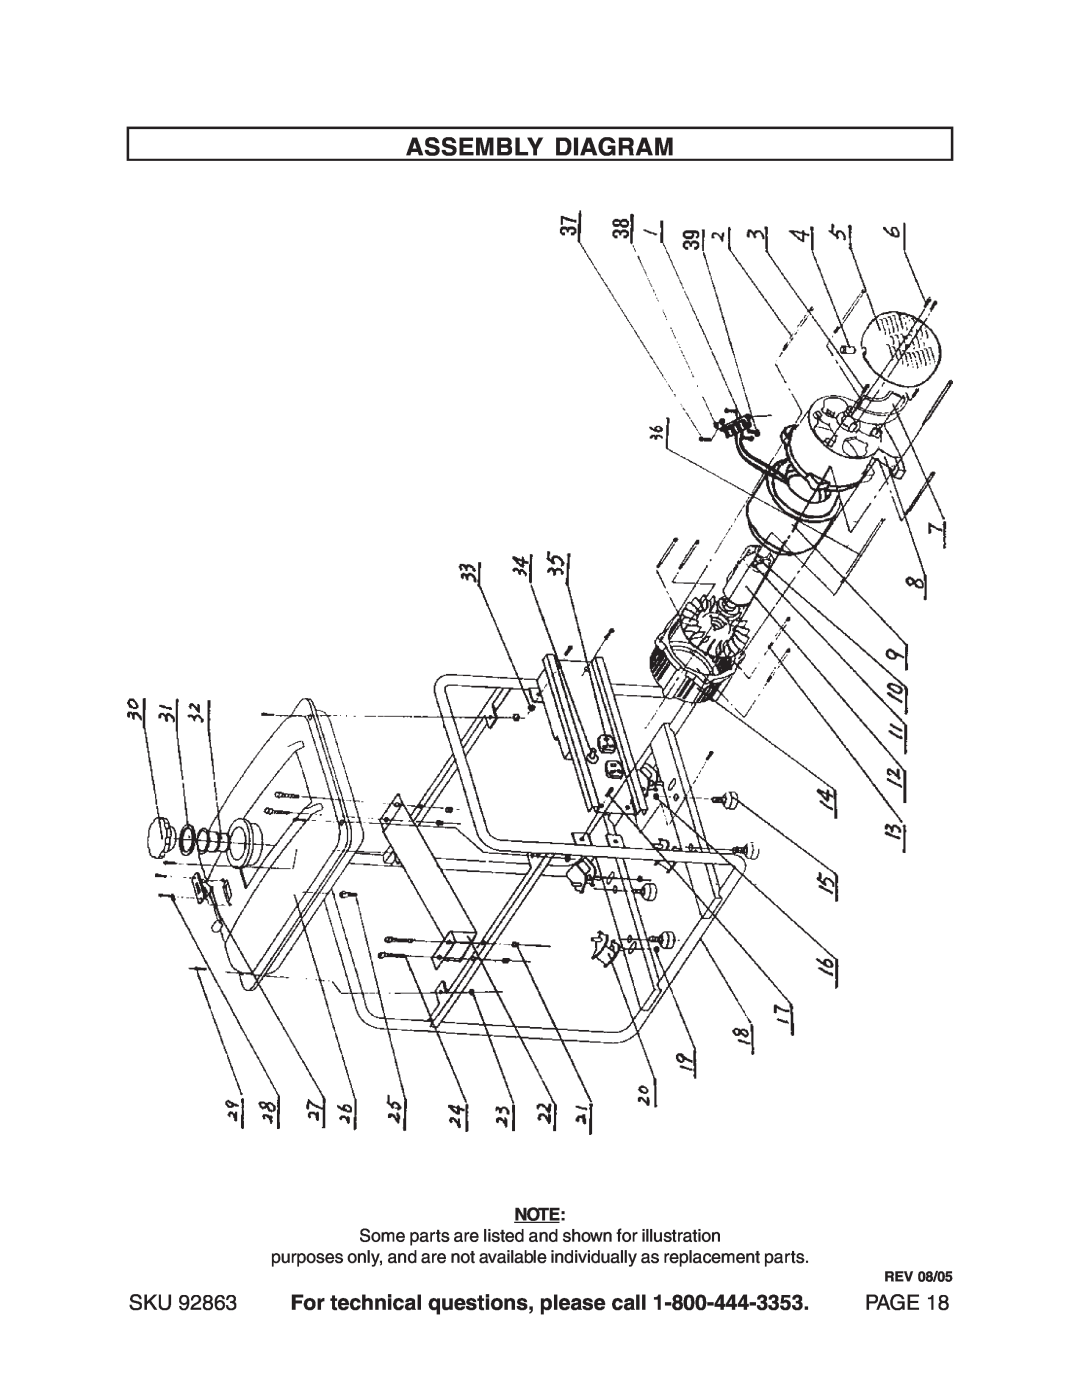 Harbor Freight Tools 92863 operating instructions Assembly Diagram, For technical questions, please call, Page, REV 08/05 